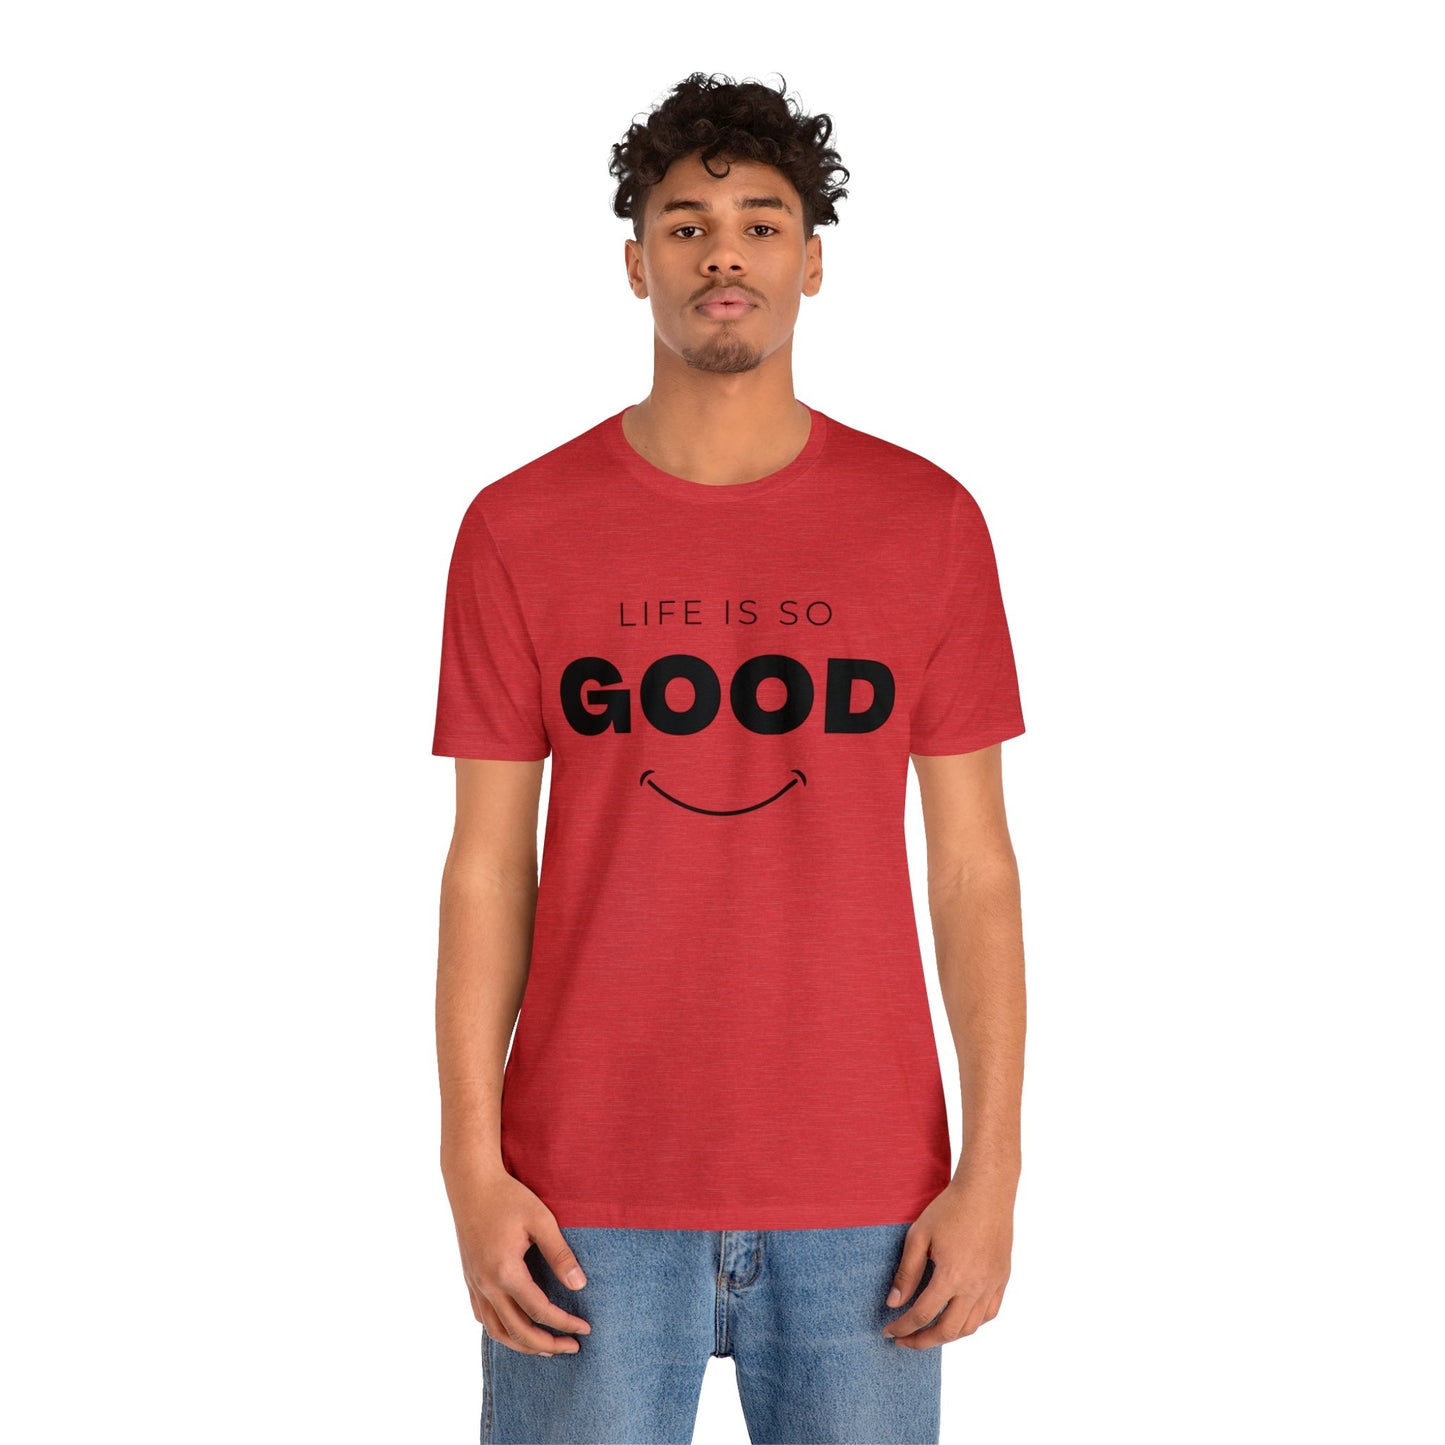 Life Is So Good - Graphic T Shirt For Men and Women